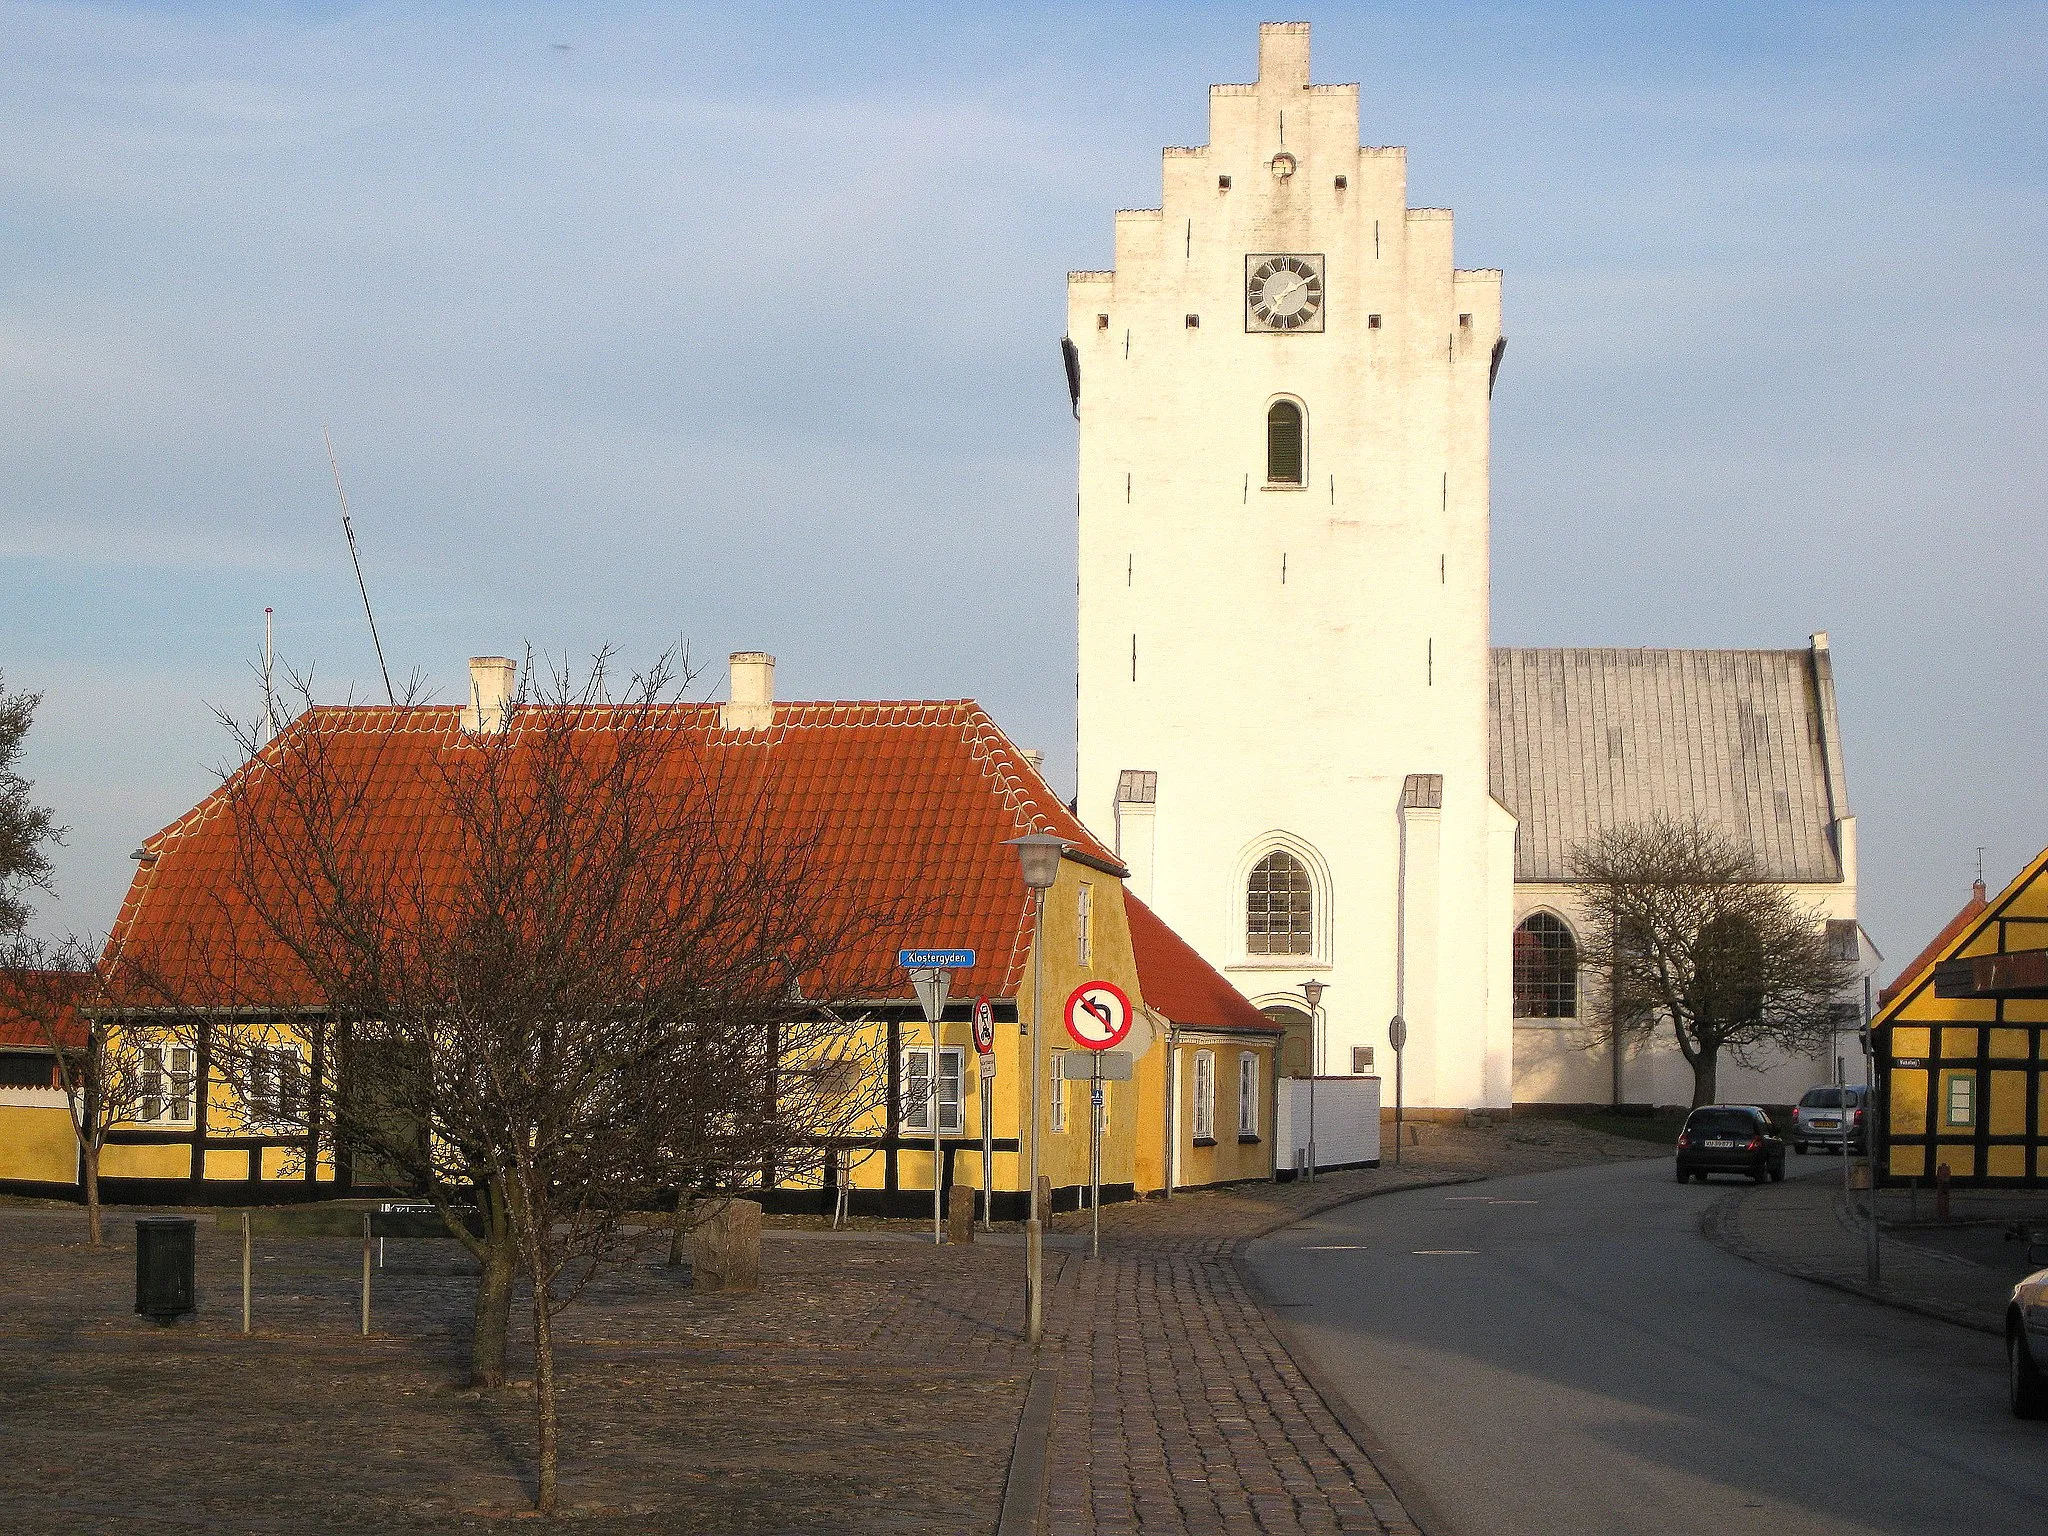 Photo showing: A view at the square "Klostertorvet" in the small town "Sæby". The town is located in North Jutland, Denmark.